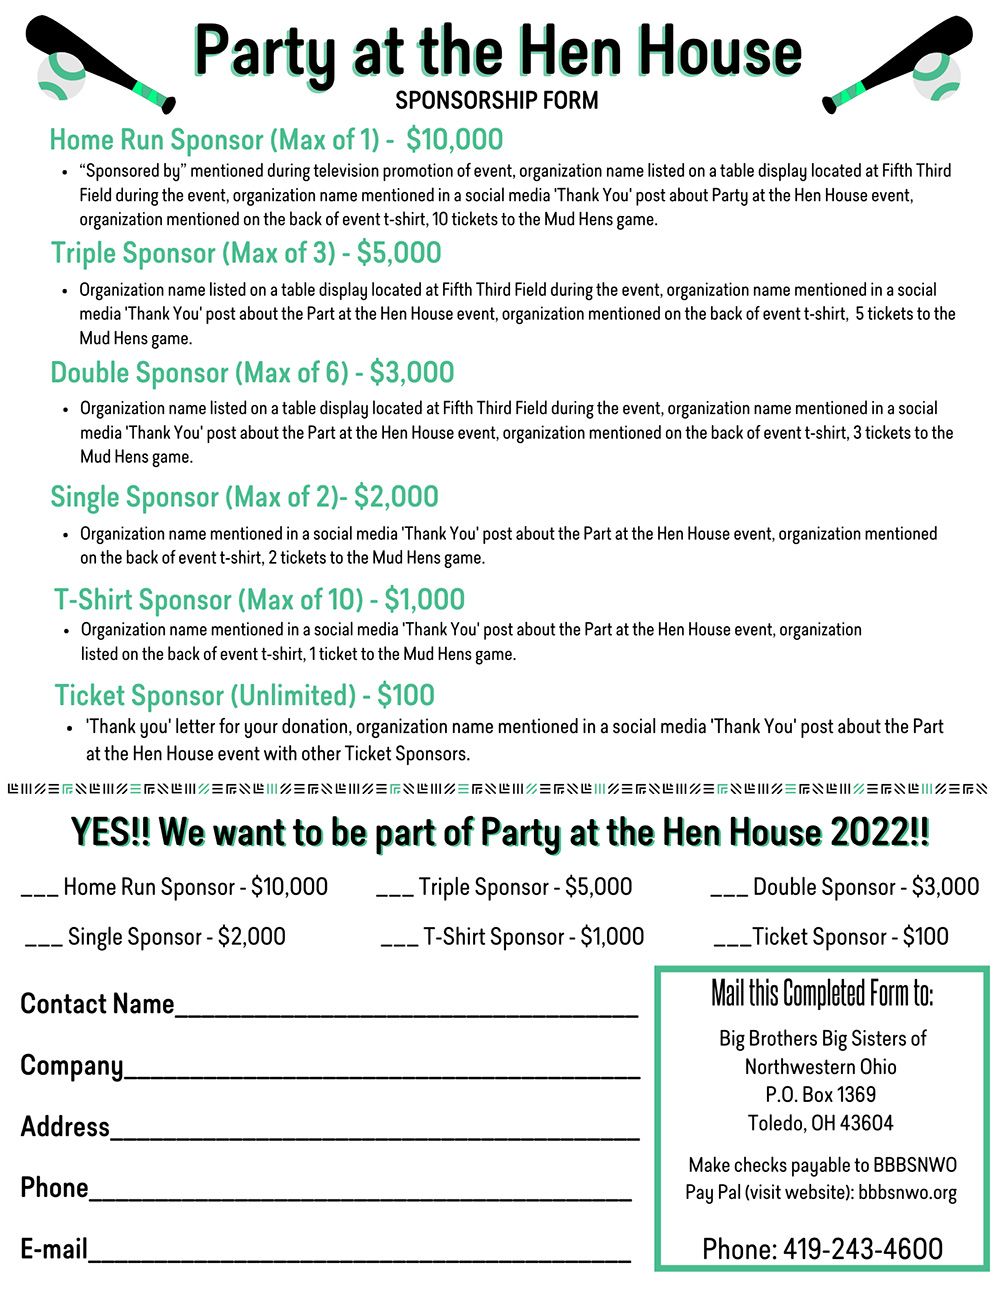 Party at the Hen House Sponsorship form